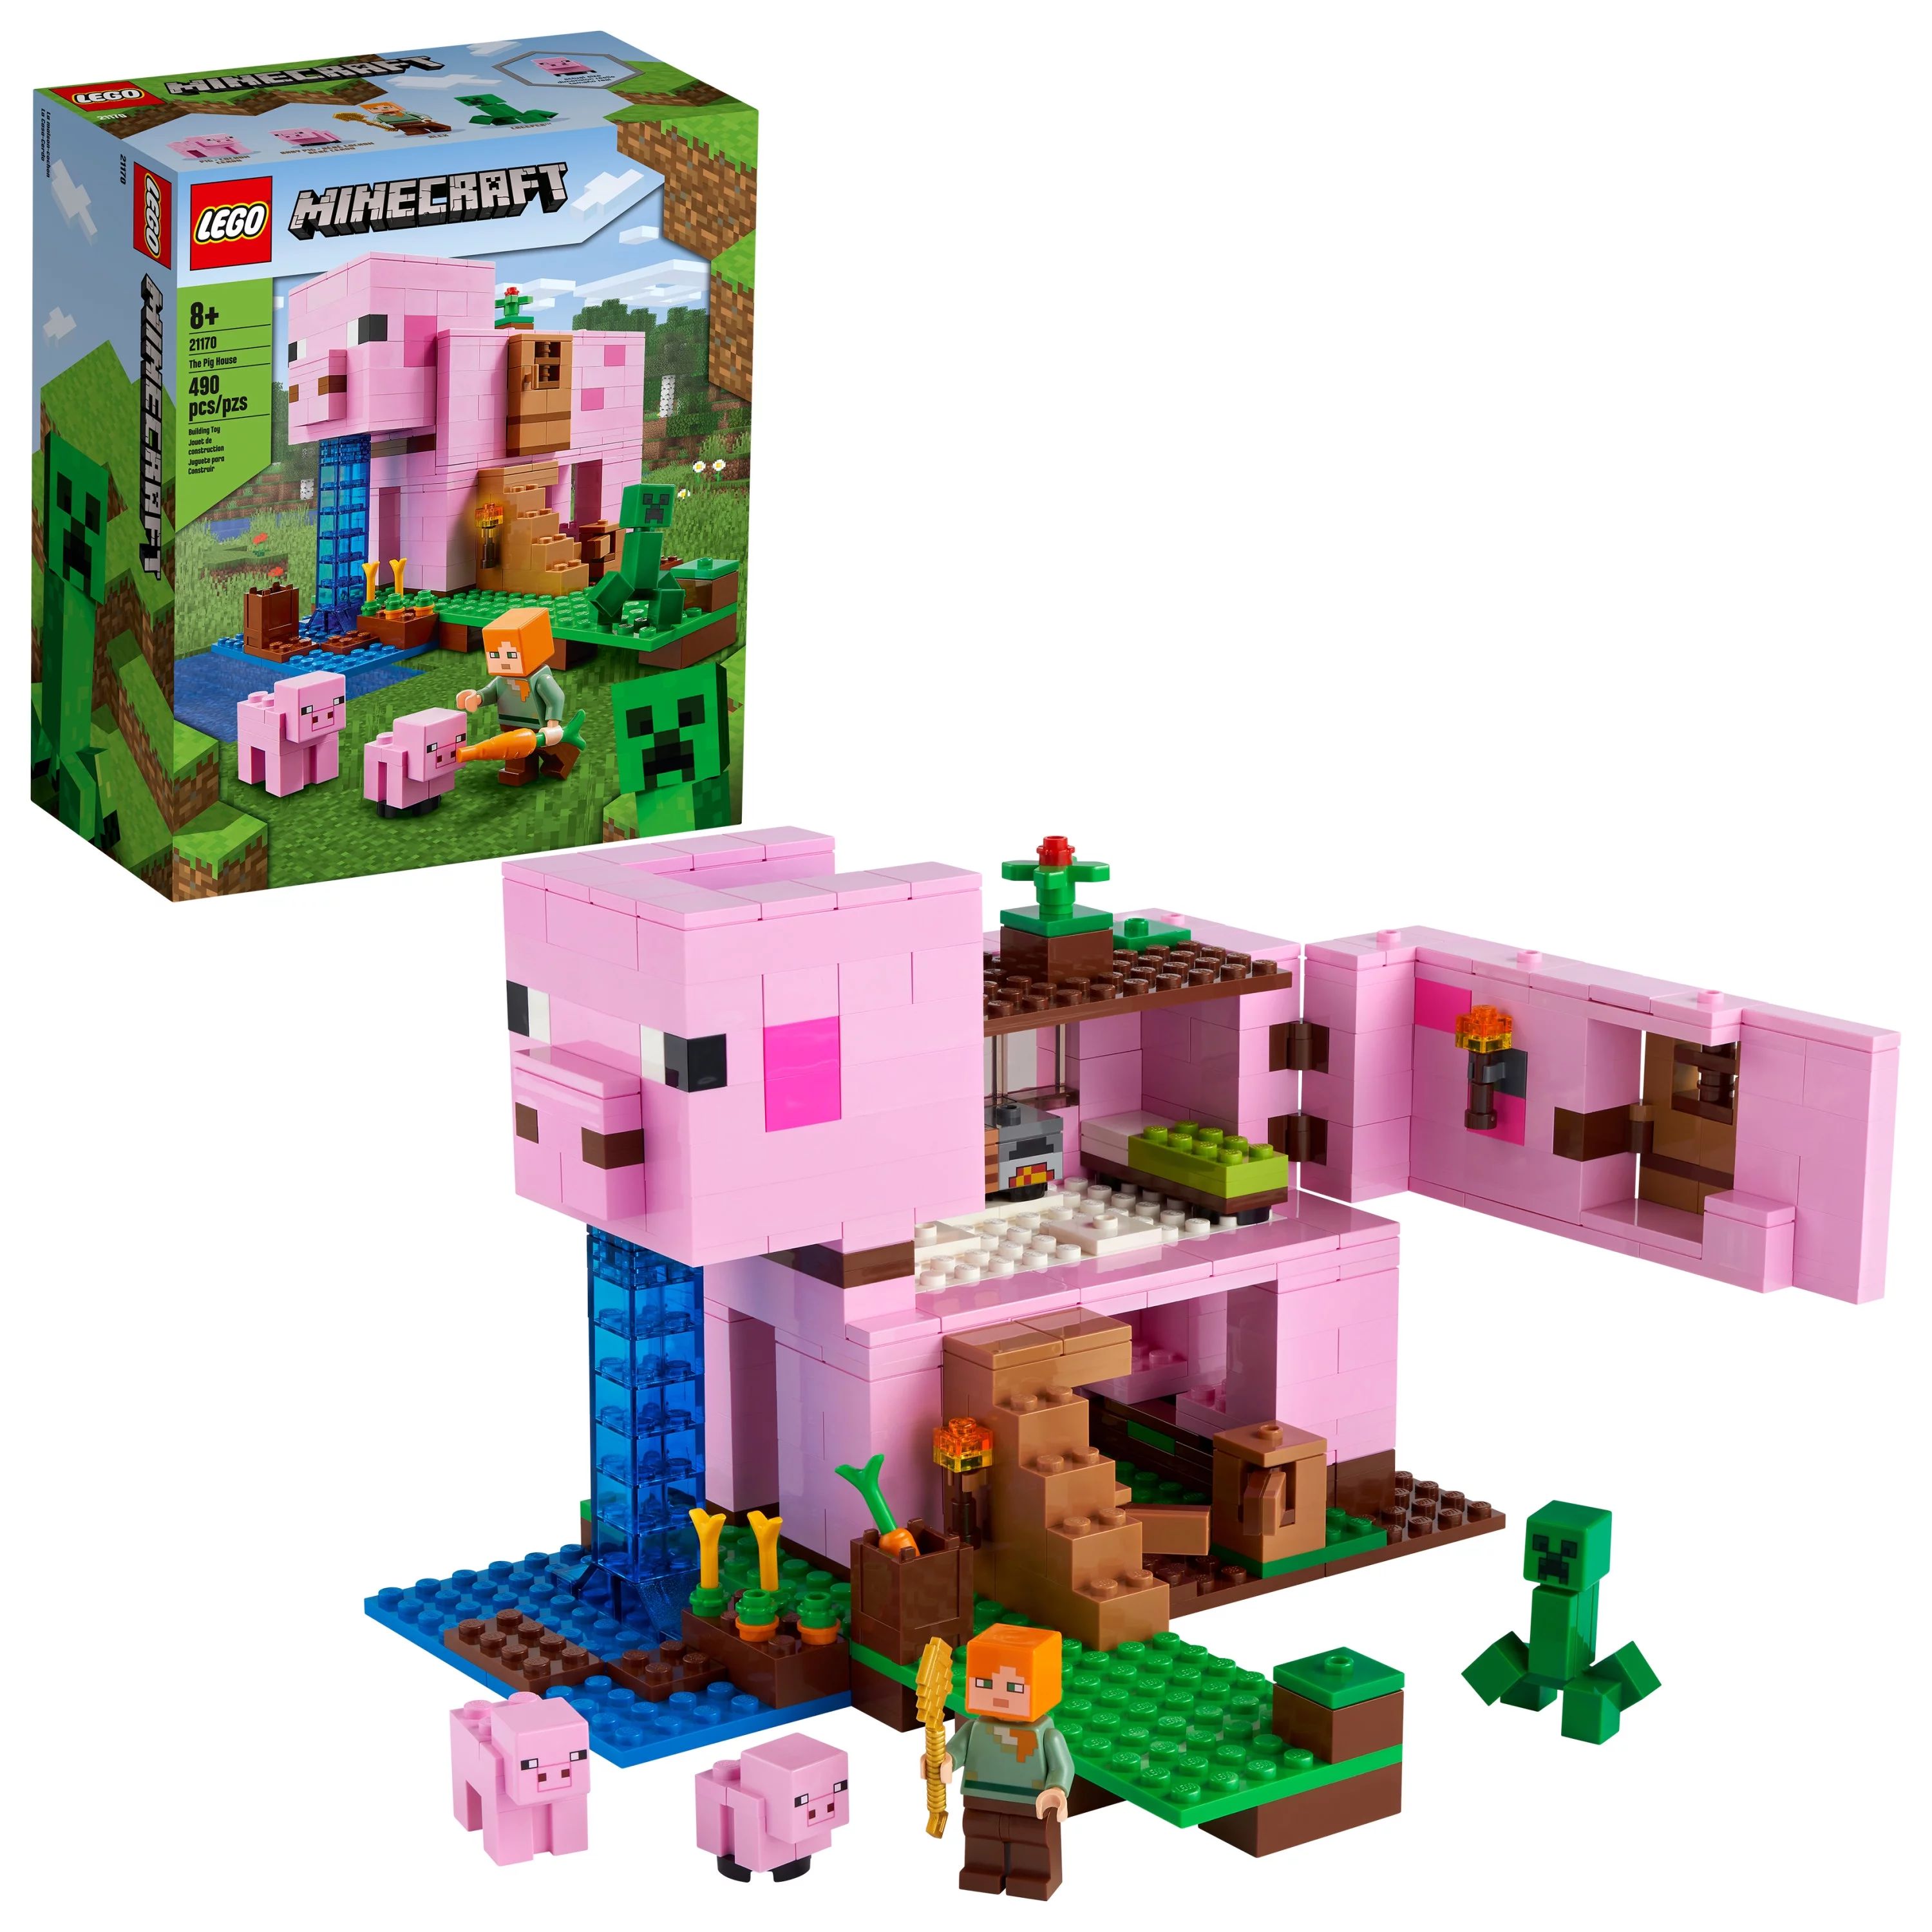 LEGO Minecraft The Pig House 21170 Featuring Alex, a Creeper and a House (490 Pieces) | Walmart (US)